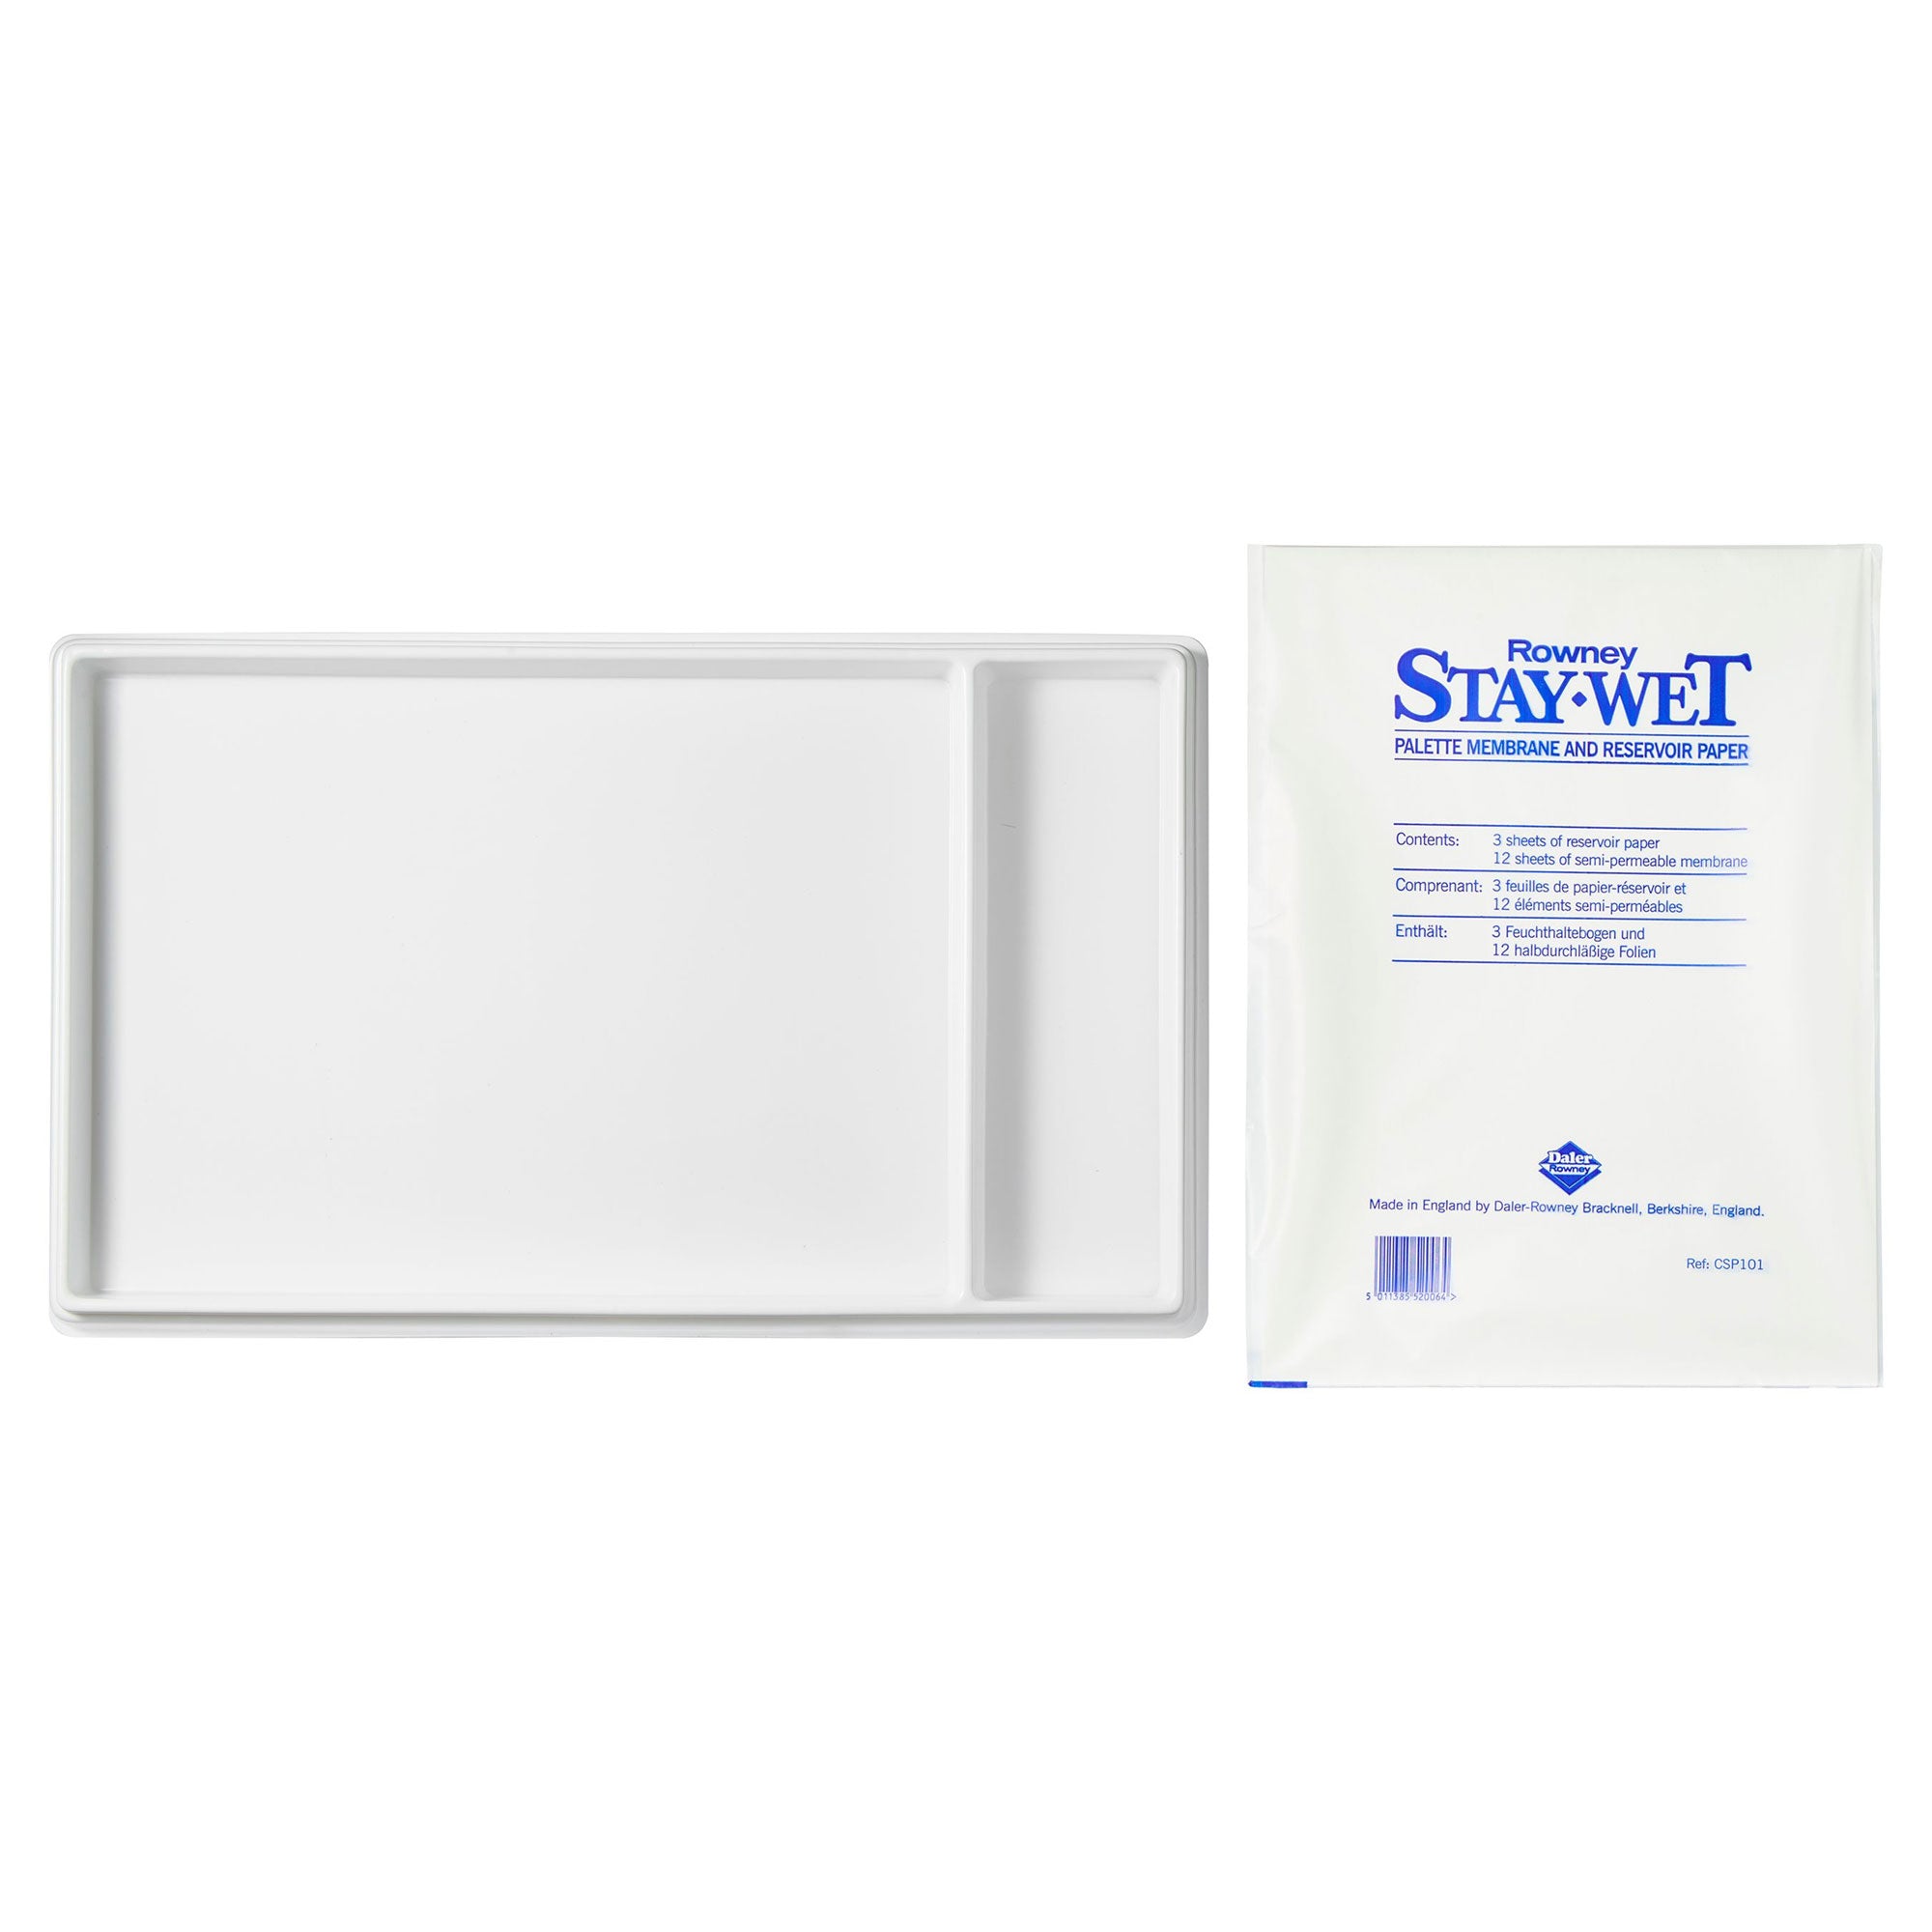 Daler-Rowney Stay-Wet Palette and Membrane